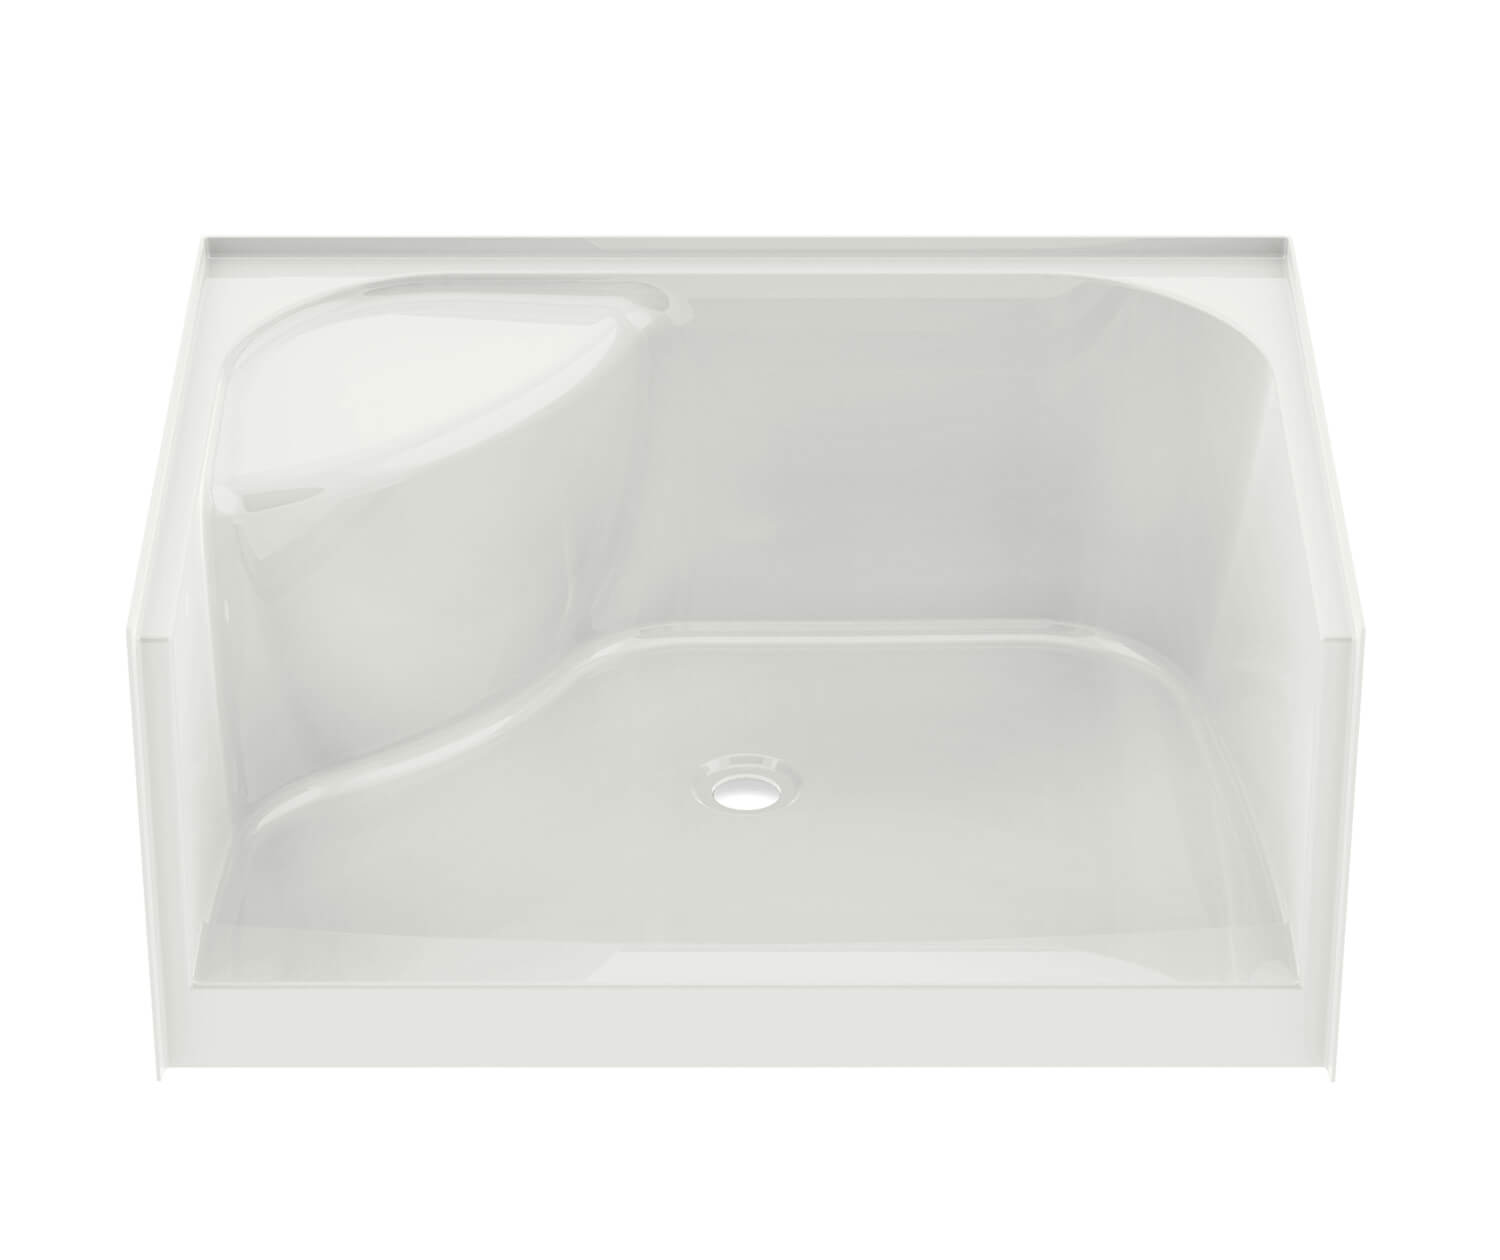 Essence Base 3448 AcrylX Alcove Shower Base with Center Drain in 